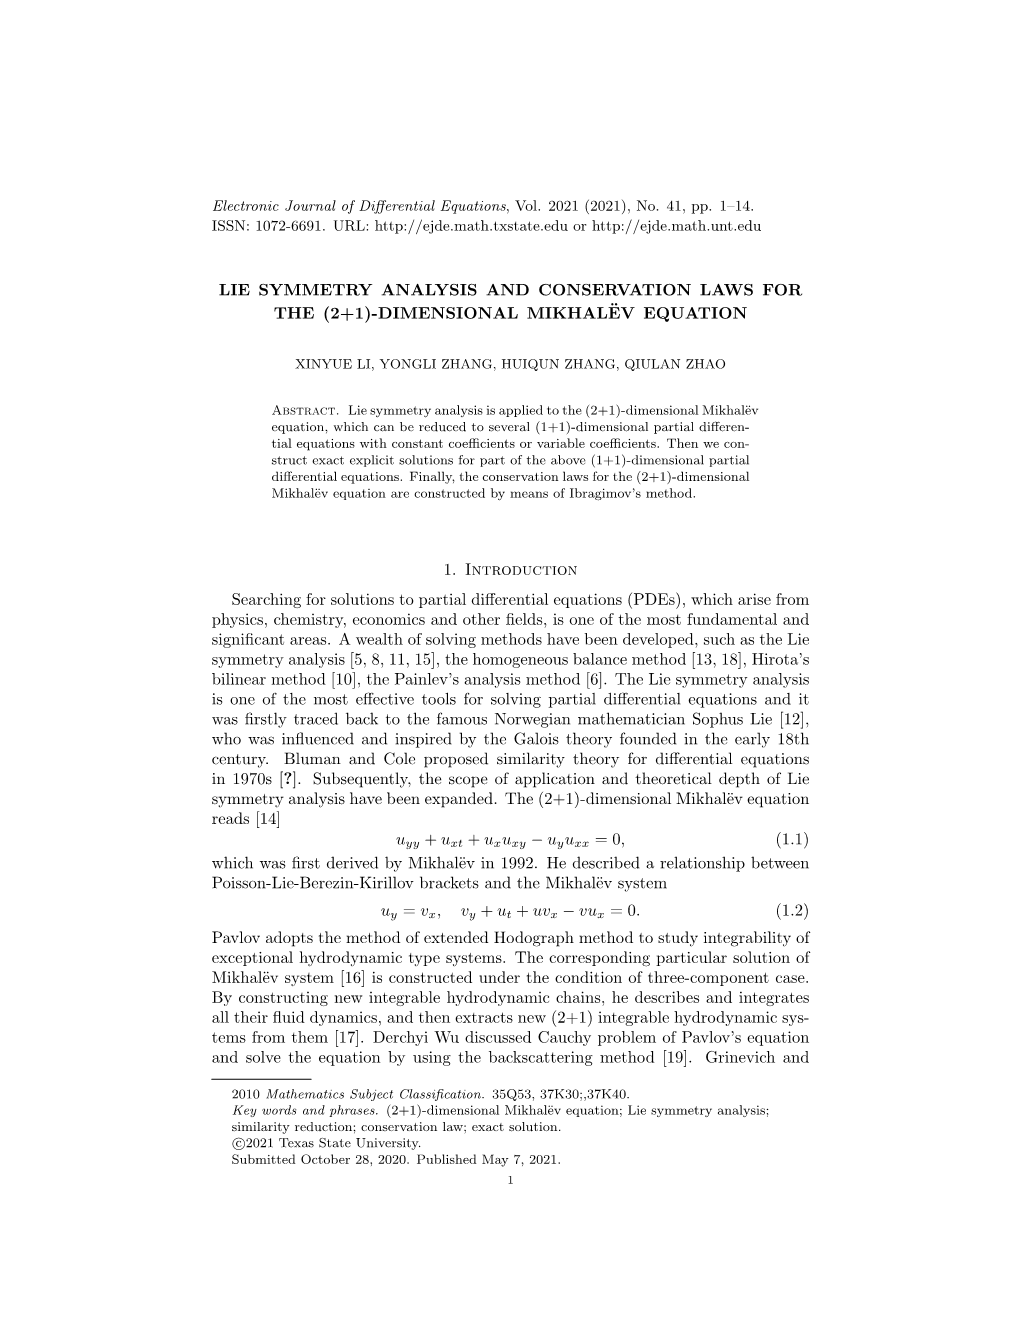 LIE SYMMETRY ANALYSIS and CONSERVATION LAWS for the (2+1)-DIMENSIONAL MIKHALËV EQUATION 1. Introduction Searching for Solutions